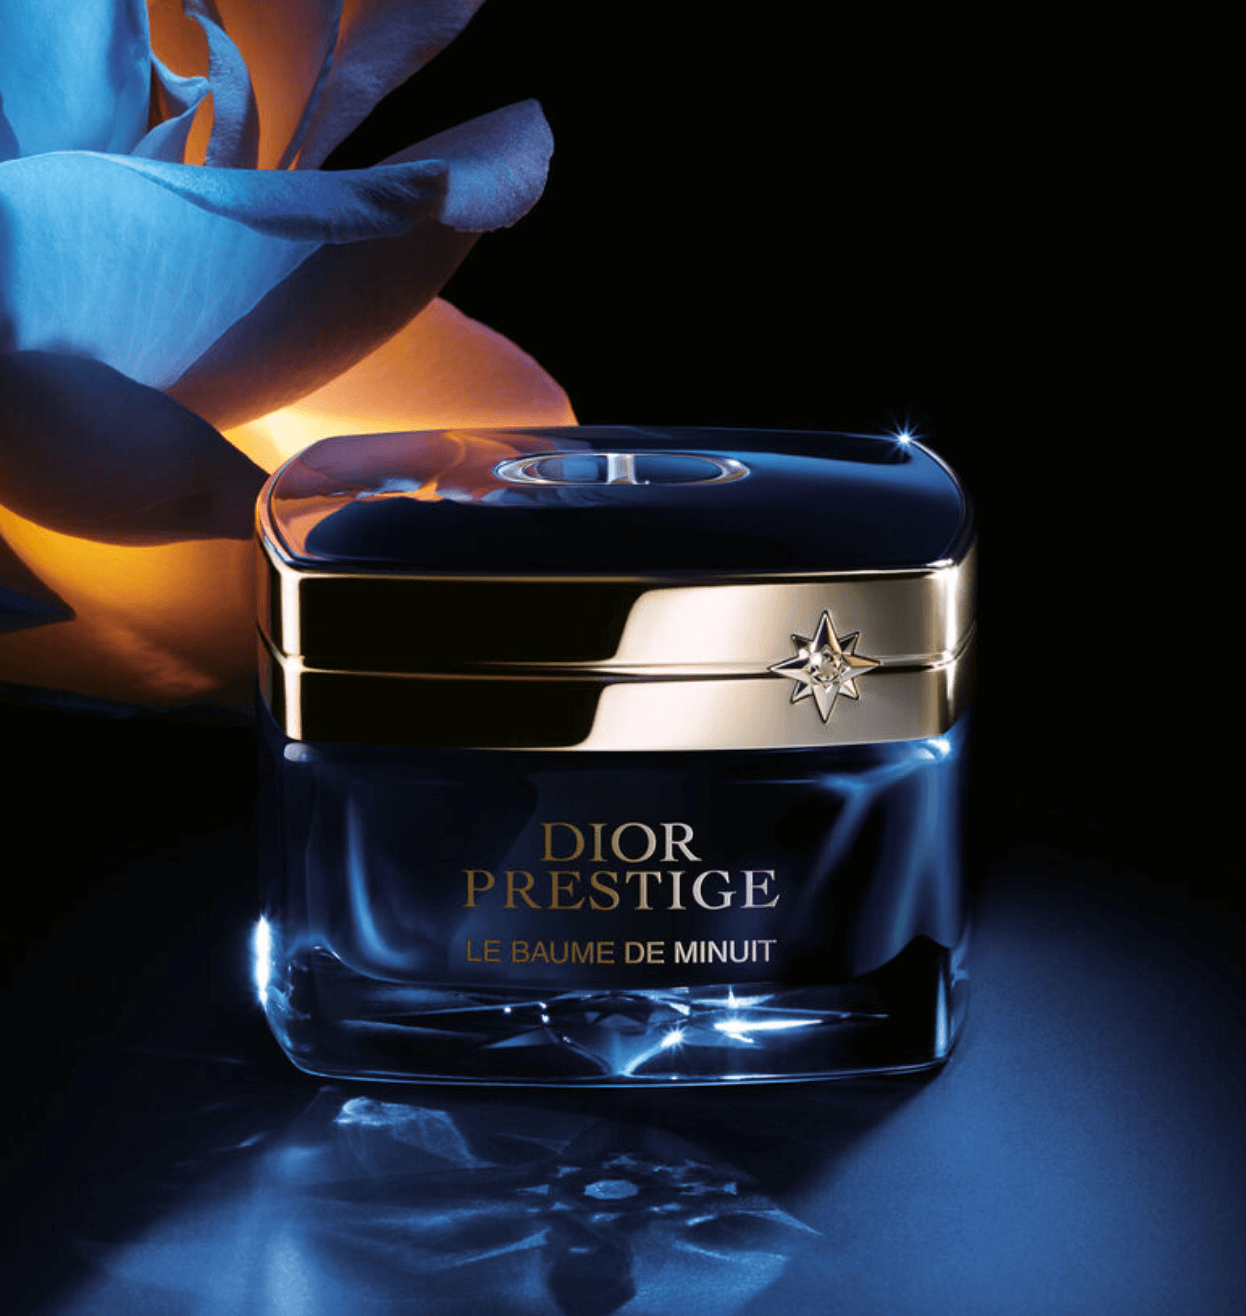 Dior Prestige harnesses the potent properties of the Rose de Granville, particularly enriched at night. 